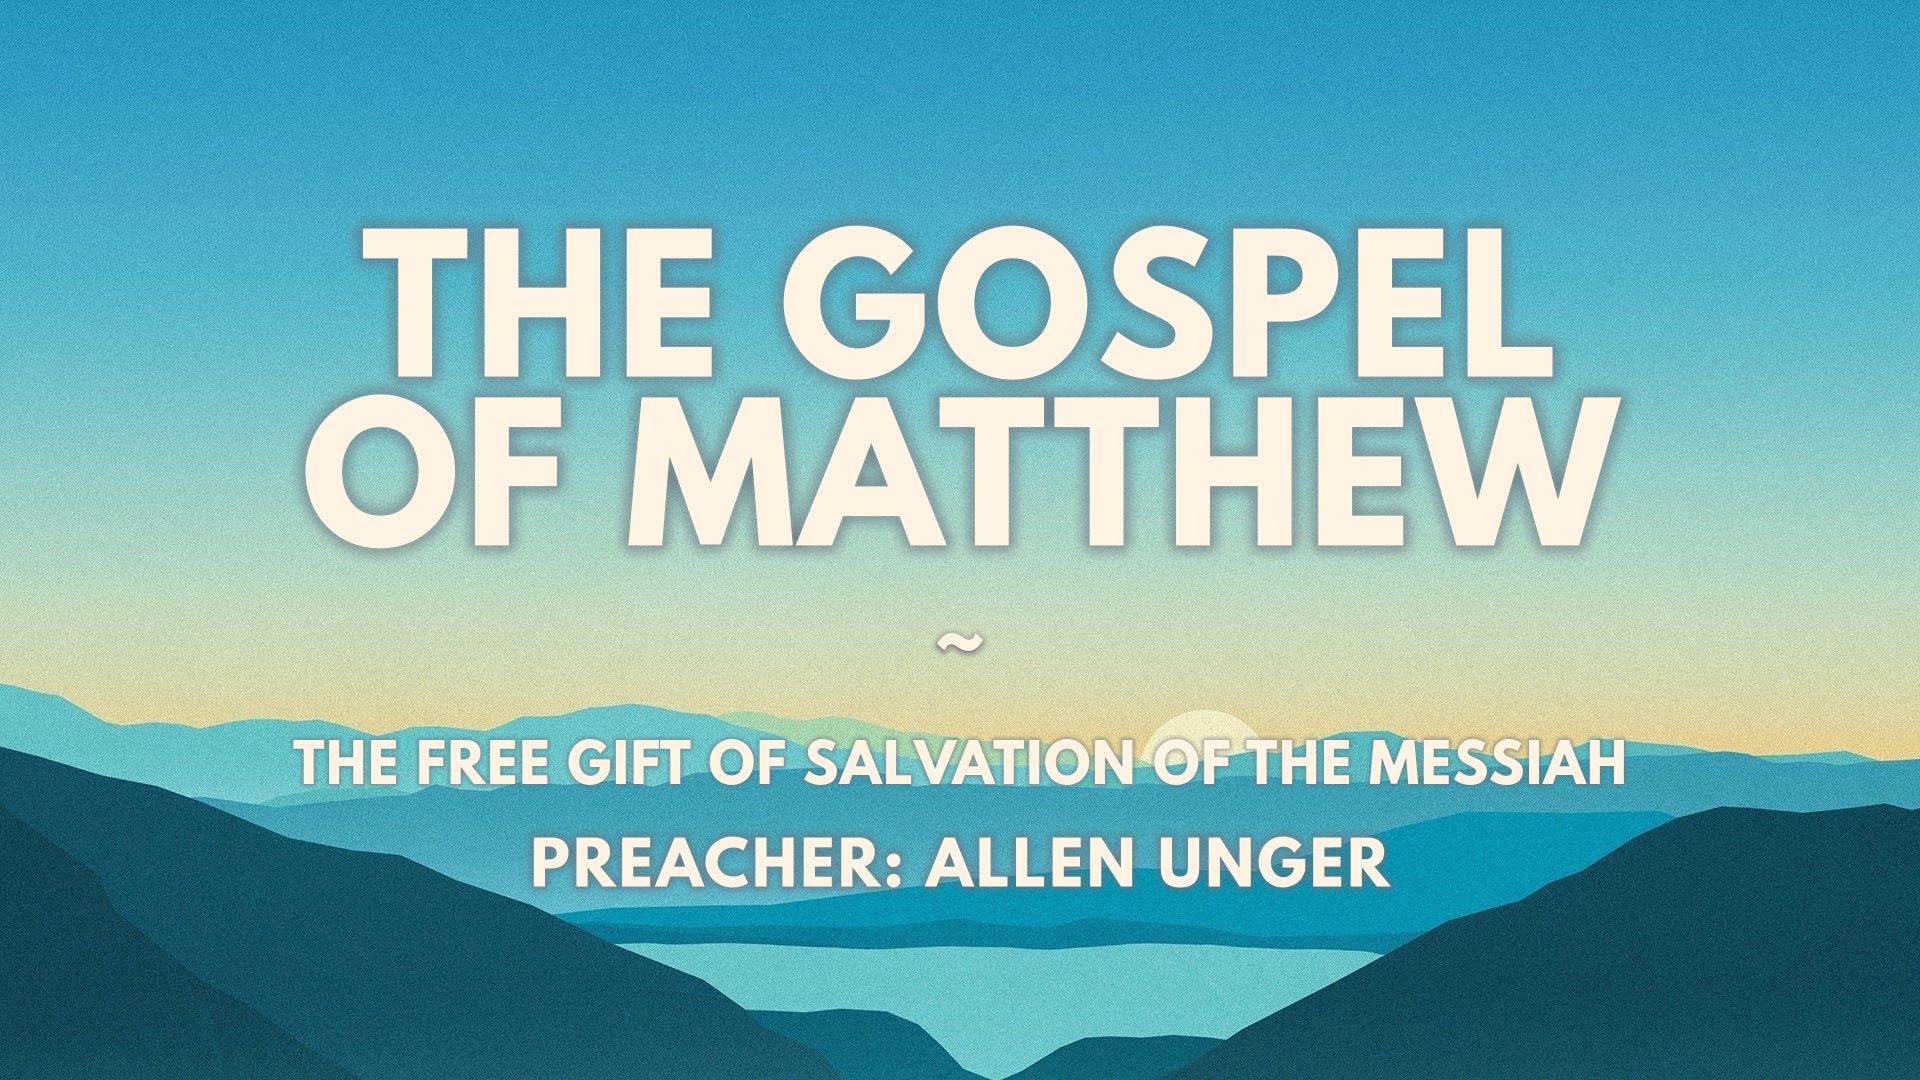 The Free Gift of Salvation of the Messiah